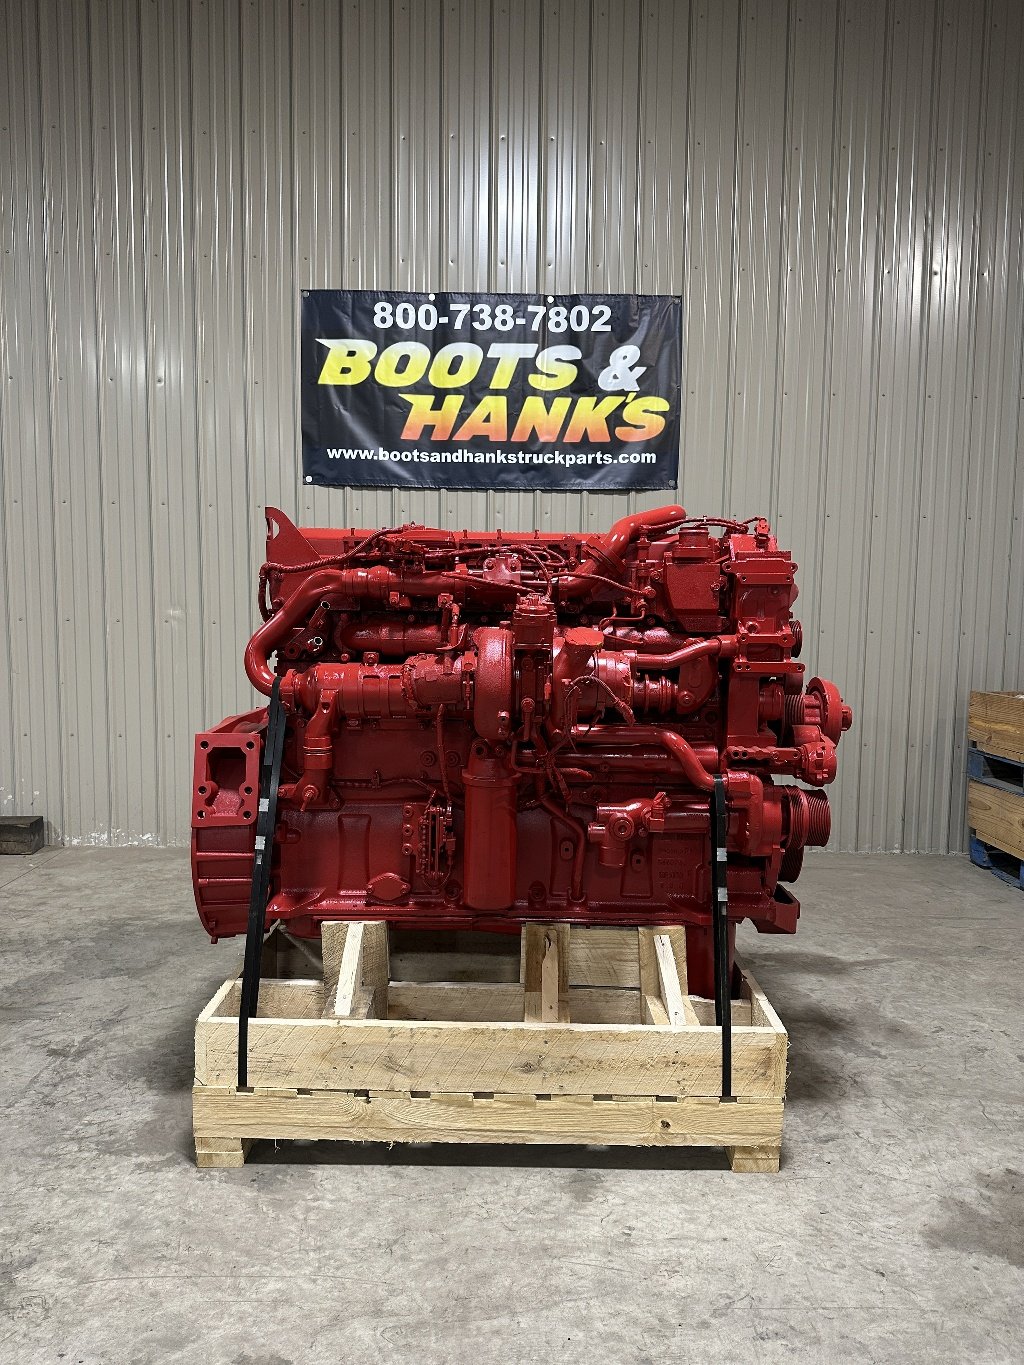 USED 2018 CUMMINS X15 COMPLETE ENGINE TRUCK PARTS #1977